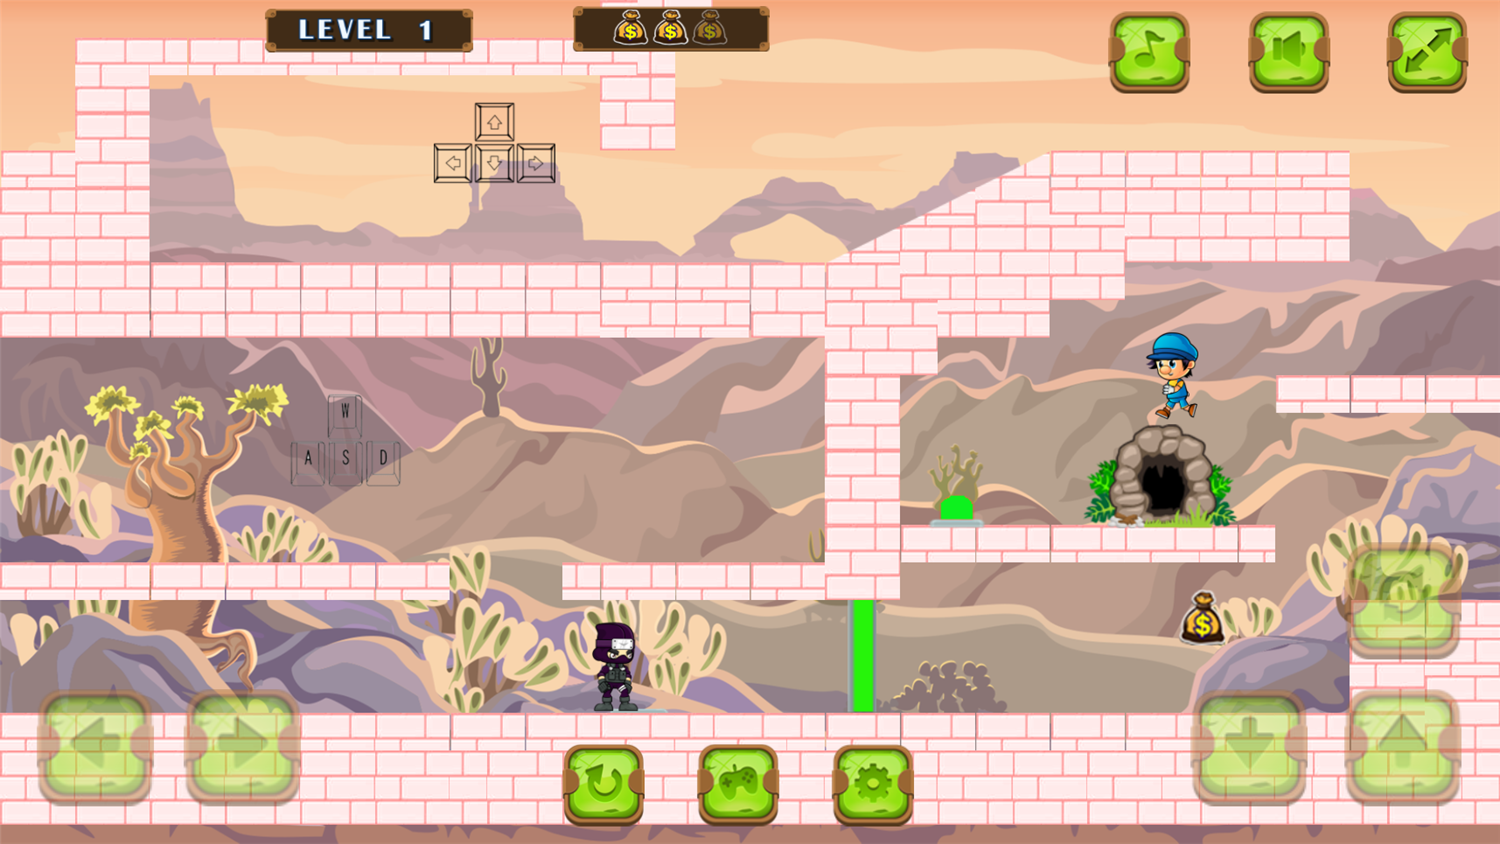 Toto Double Trouble Game Level Play Screenshot.